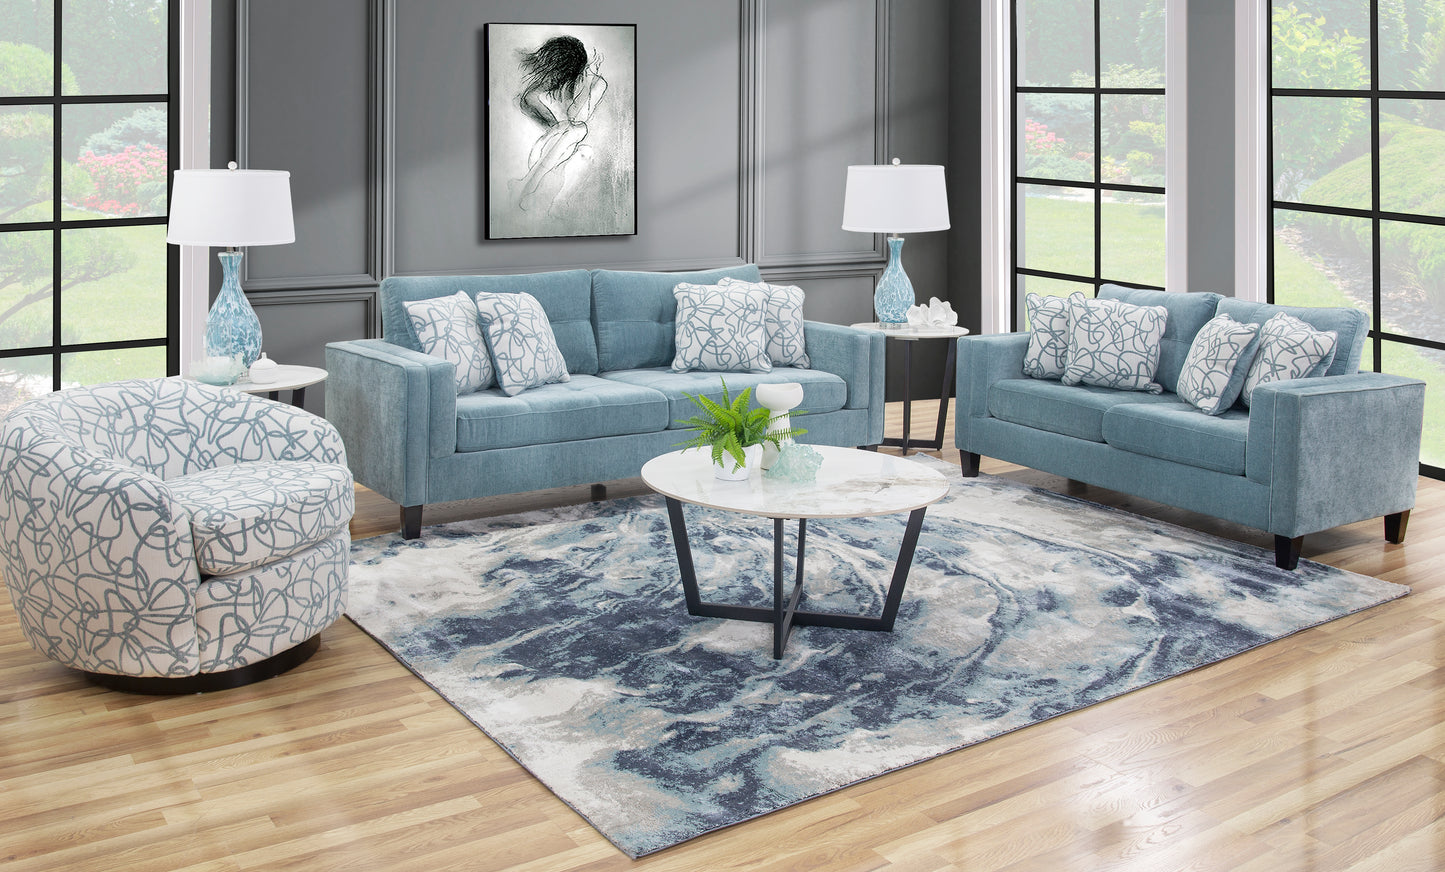 Fleming Teal 3 Piece Living Room